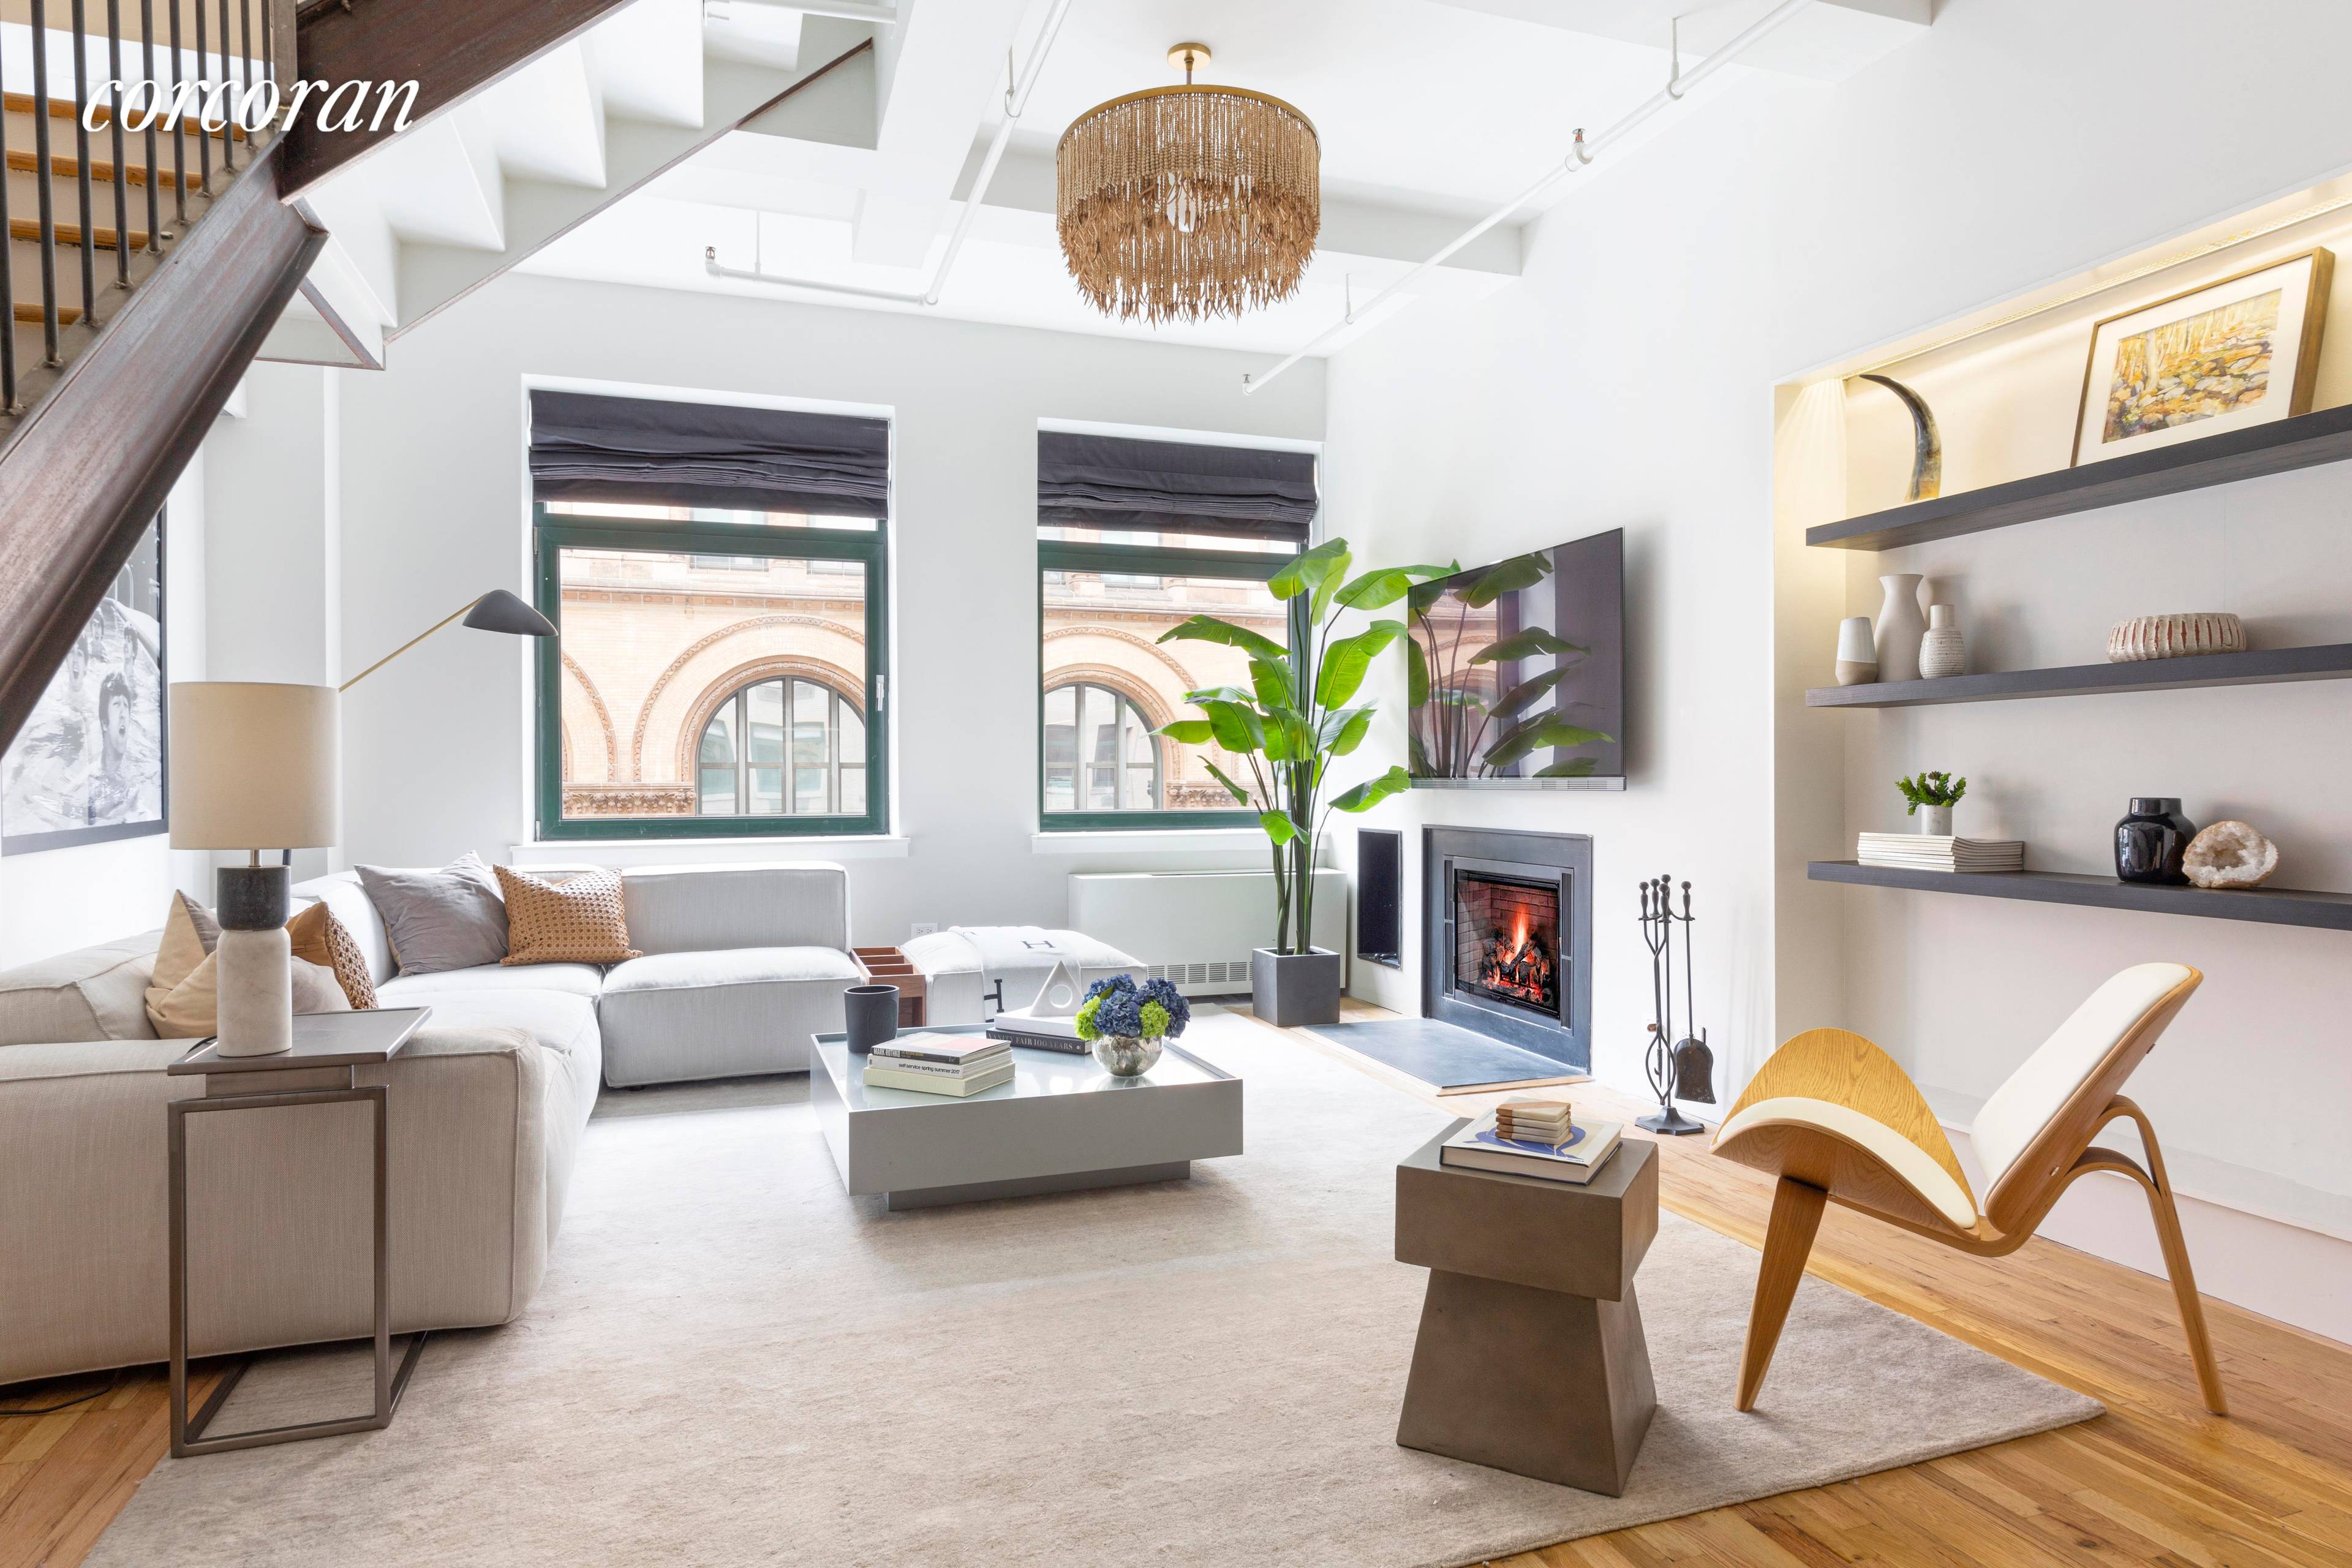 NOHO DUPLEX DESIGNERS LOFTRare opportunity to own an oversized 1, 200 square foot plus, two story loft with a wood burning fireplace in the historic Silk building condominium in NoHo.